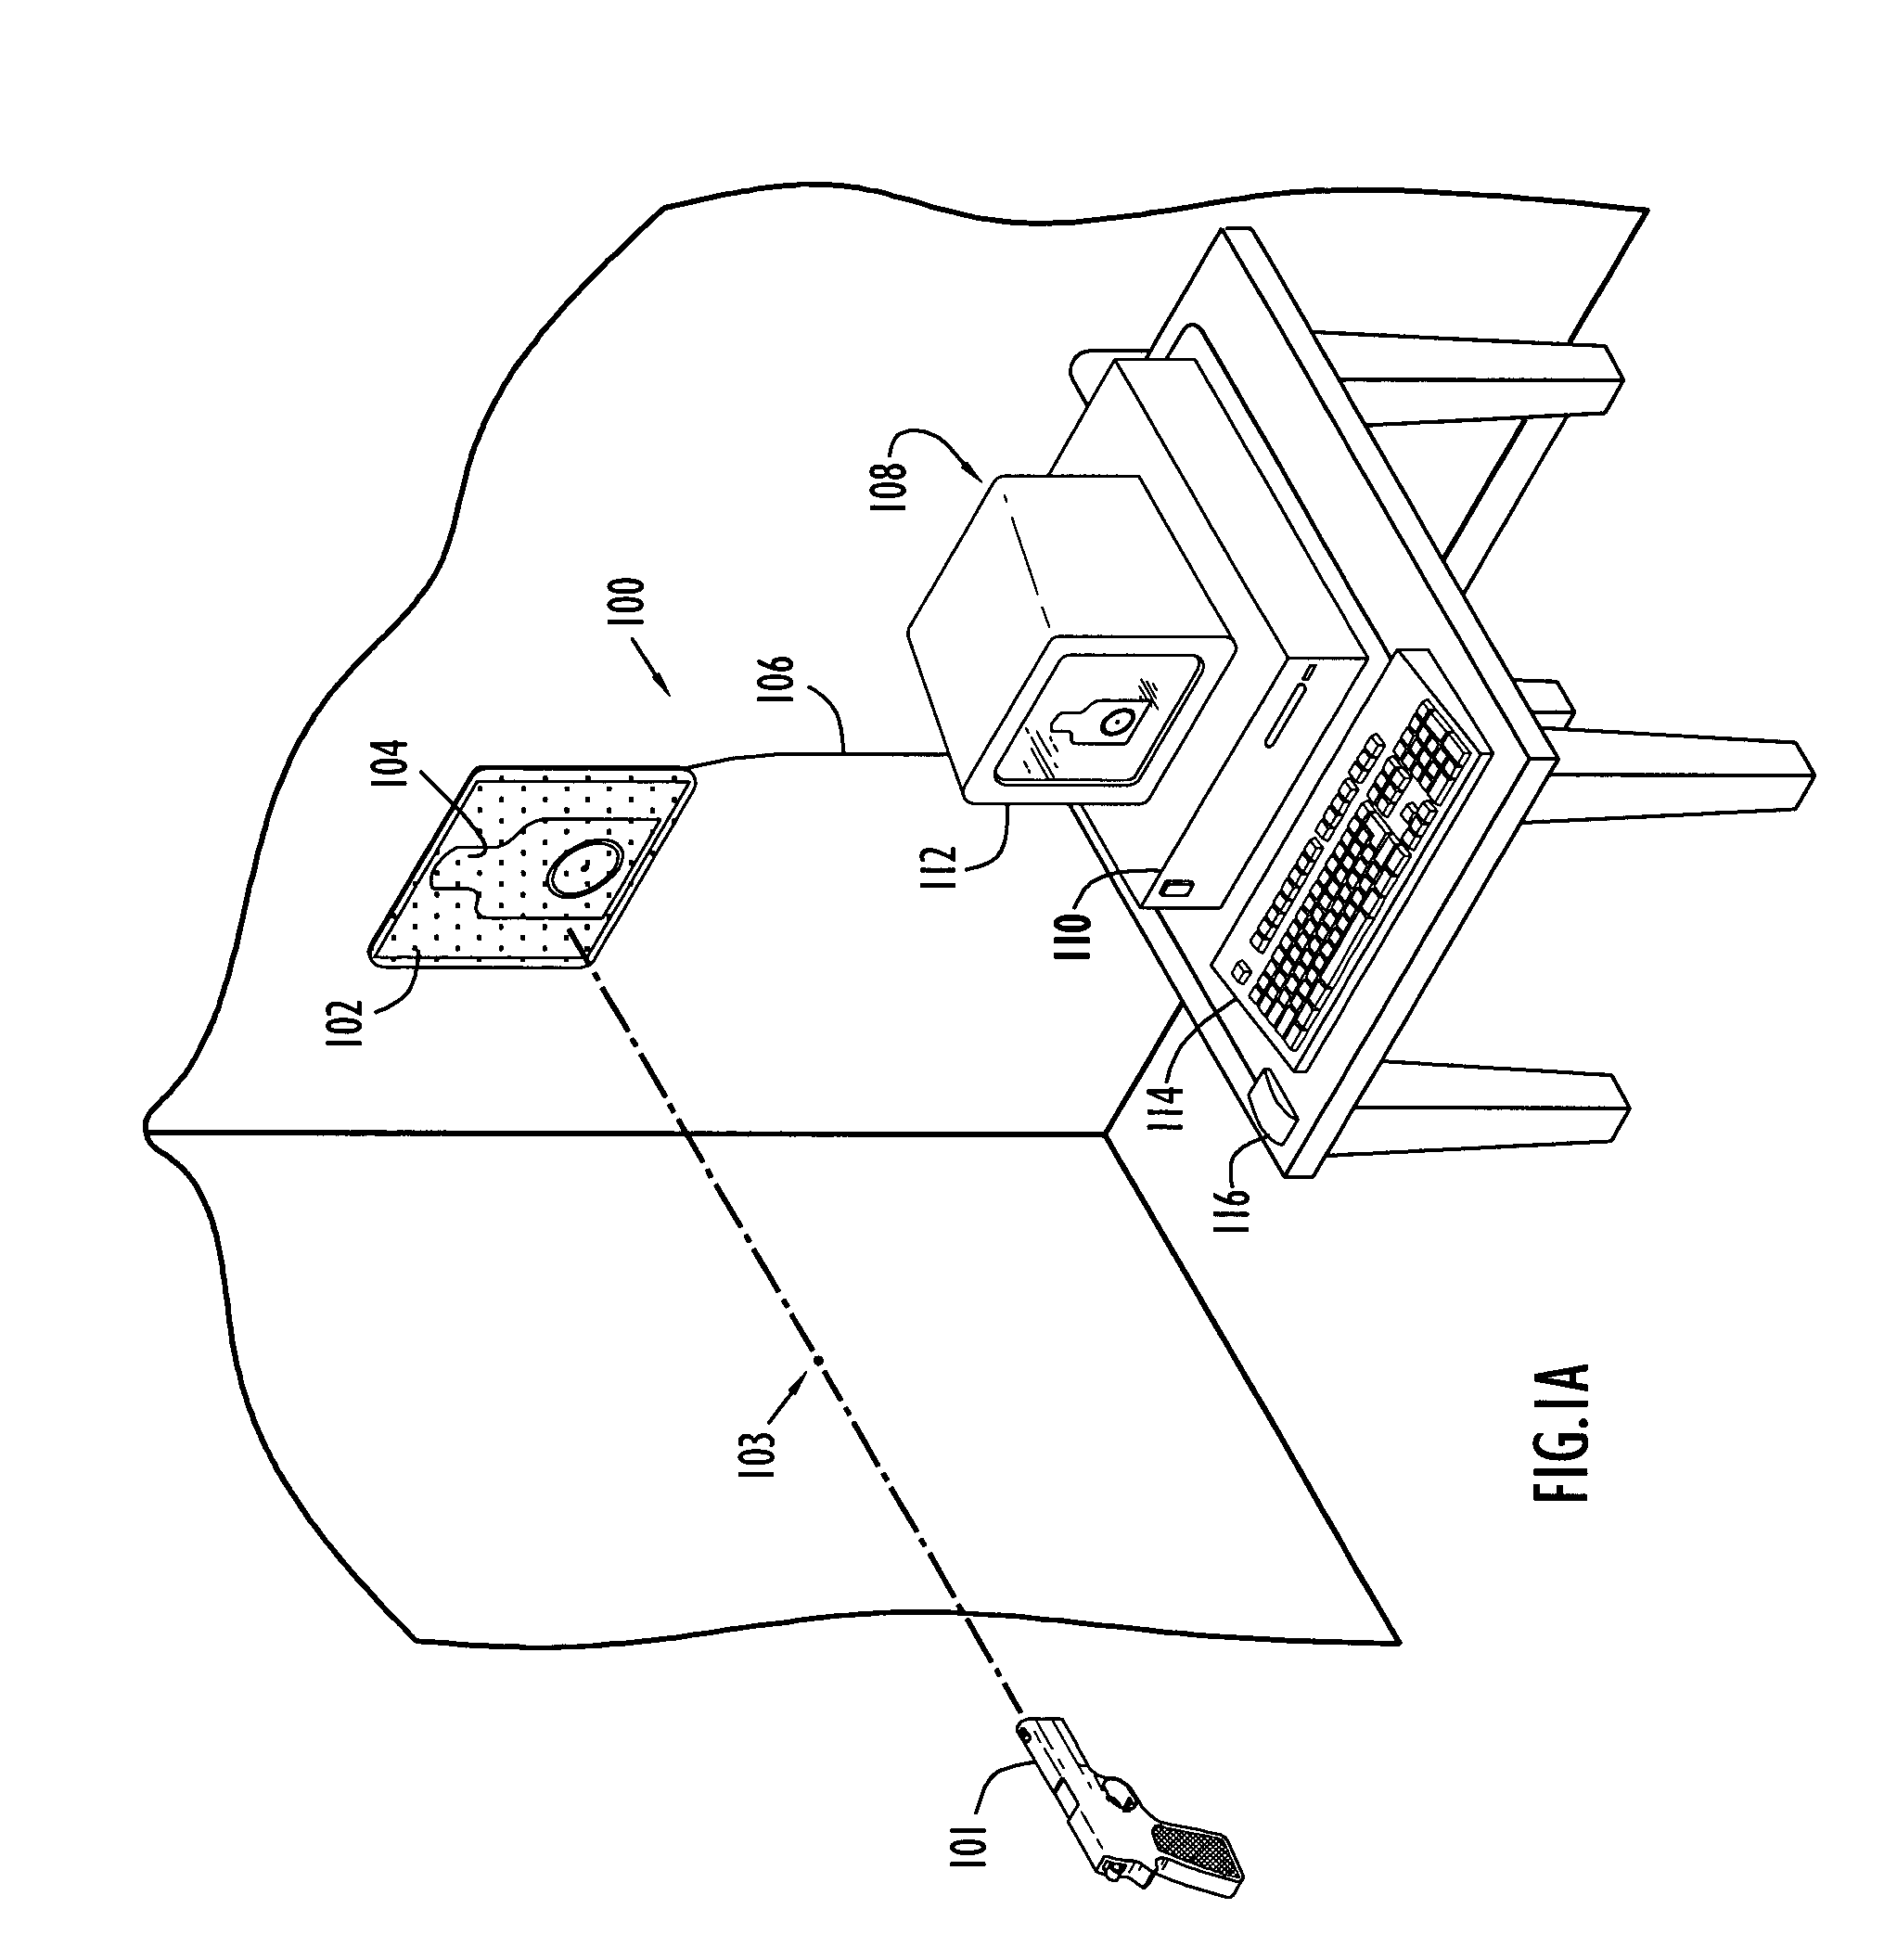 Target system and method for ascertaining target impact locations of a projectile propelled from a soft air type firearm